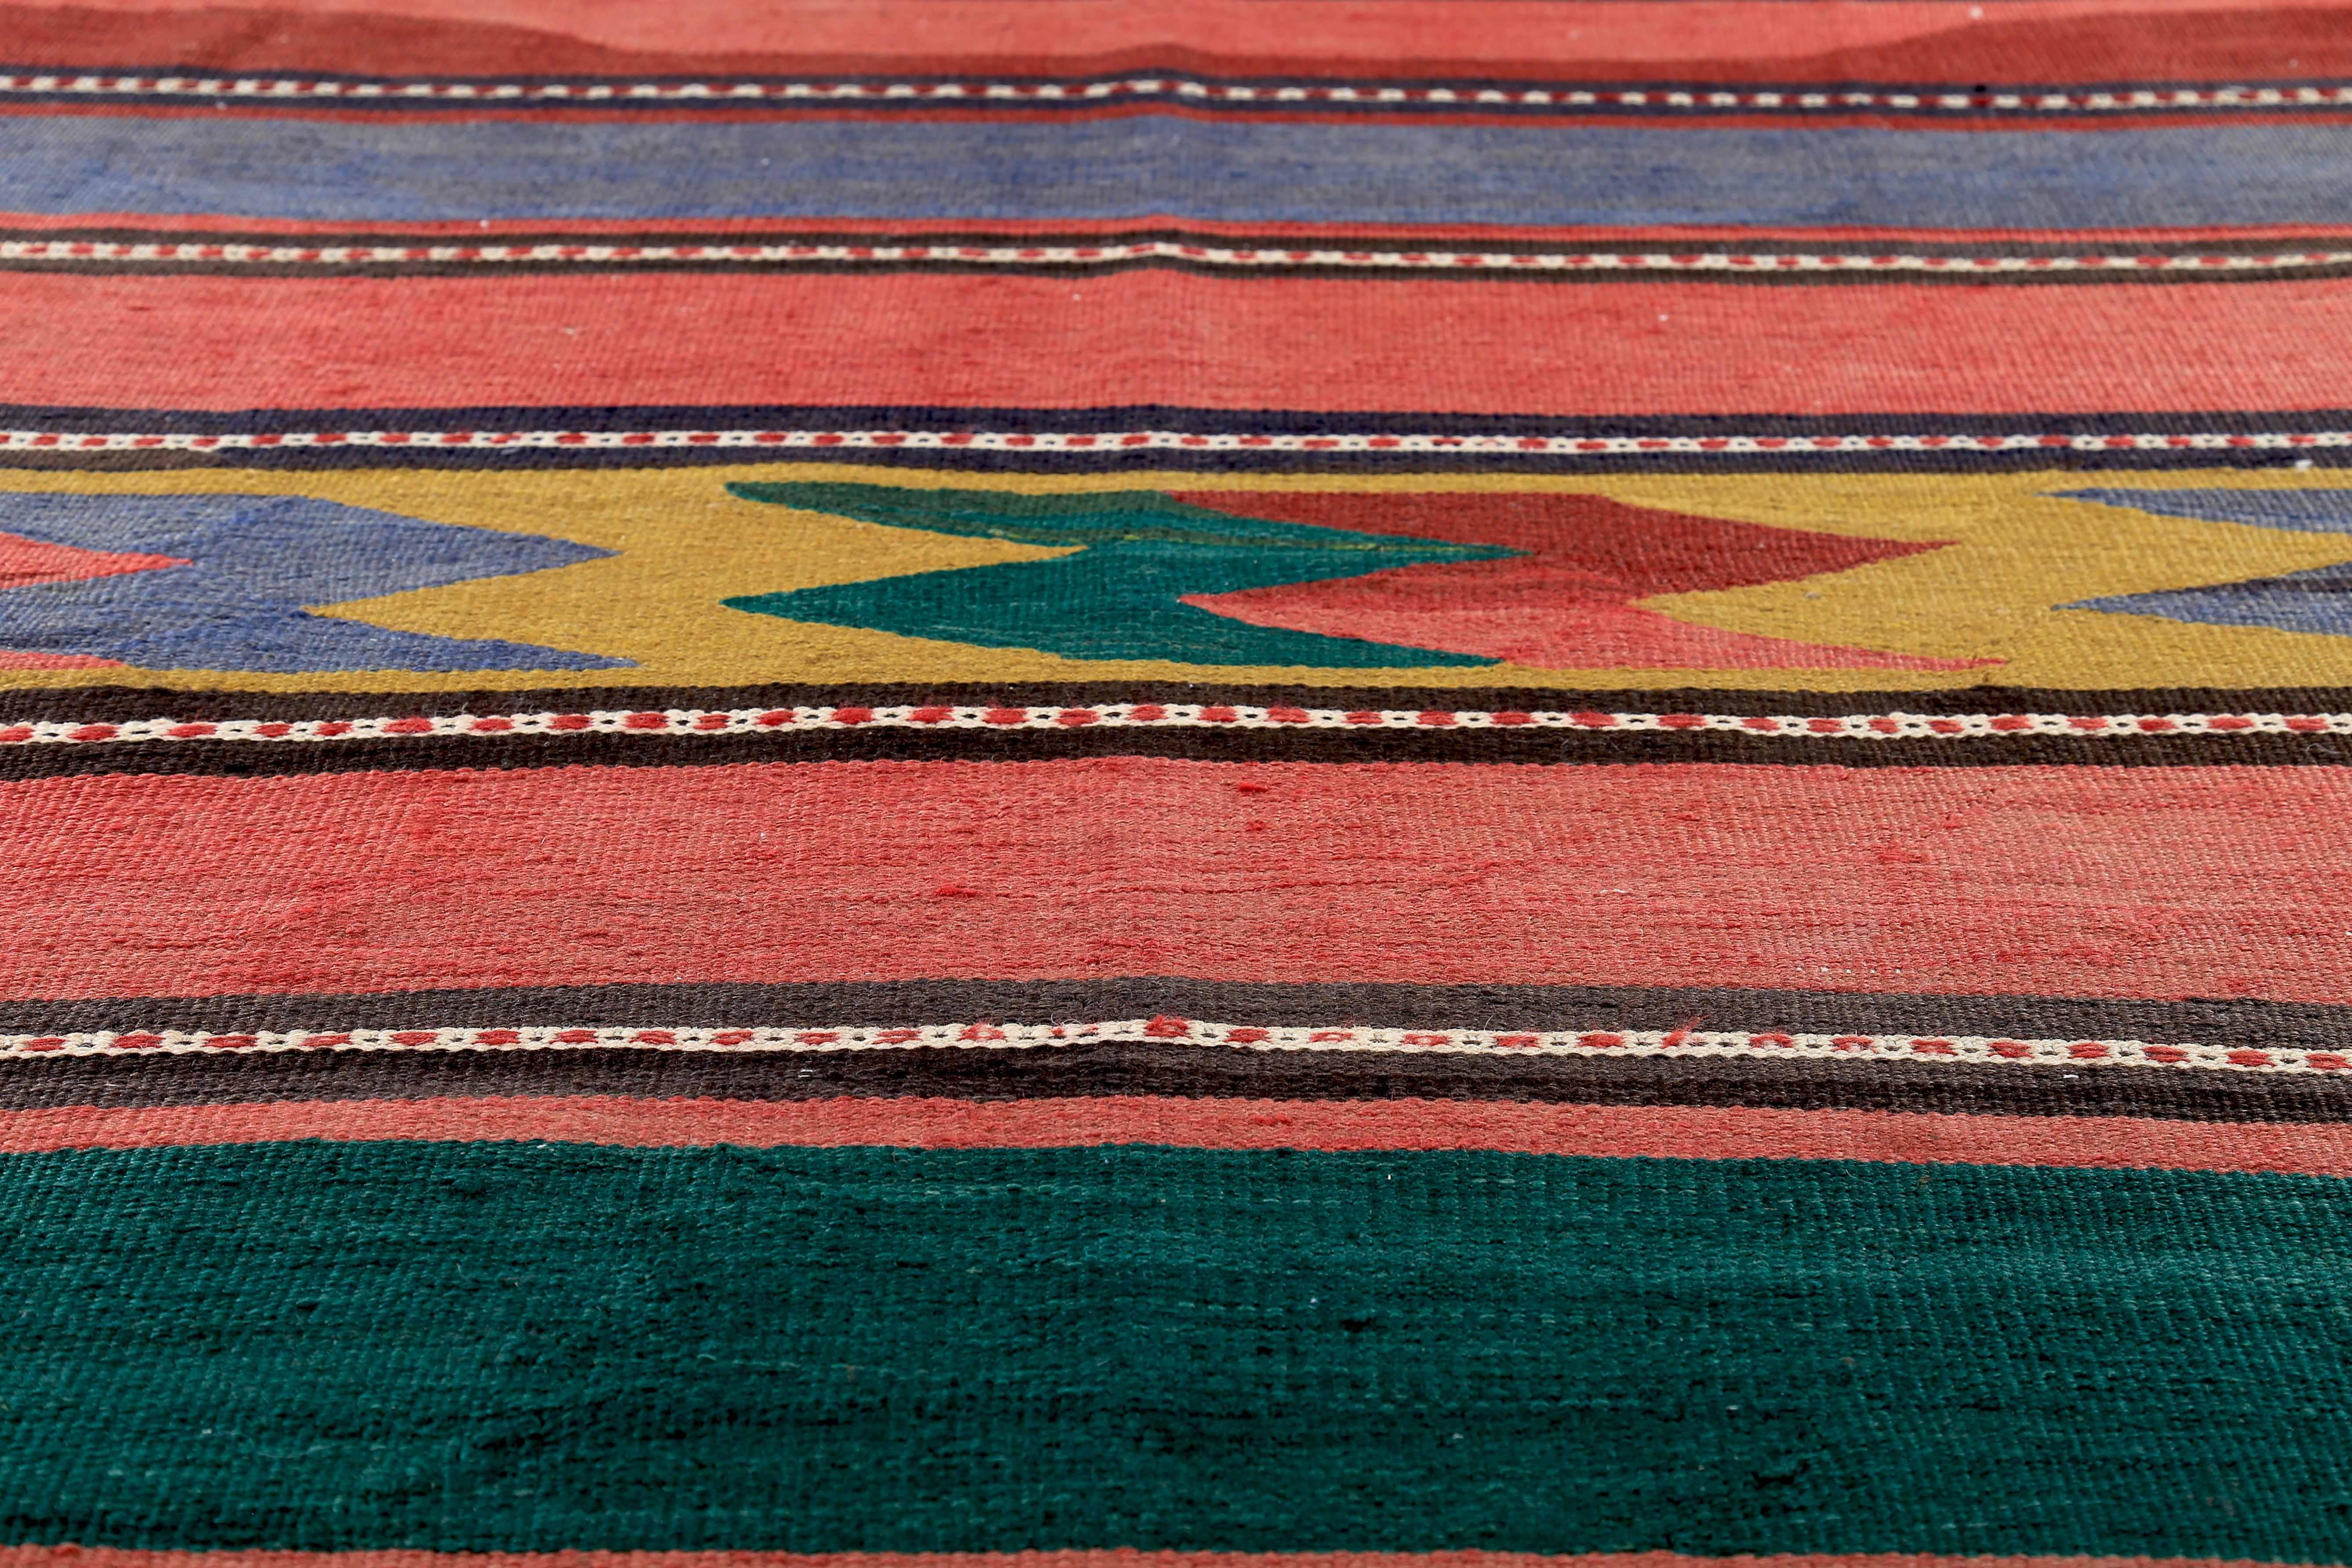 Hand-Woven Modern Turkish Kilim Runner Rug with Red and Green Tribal Patterns For Sale